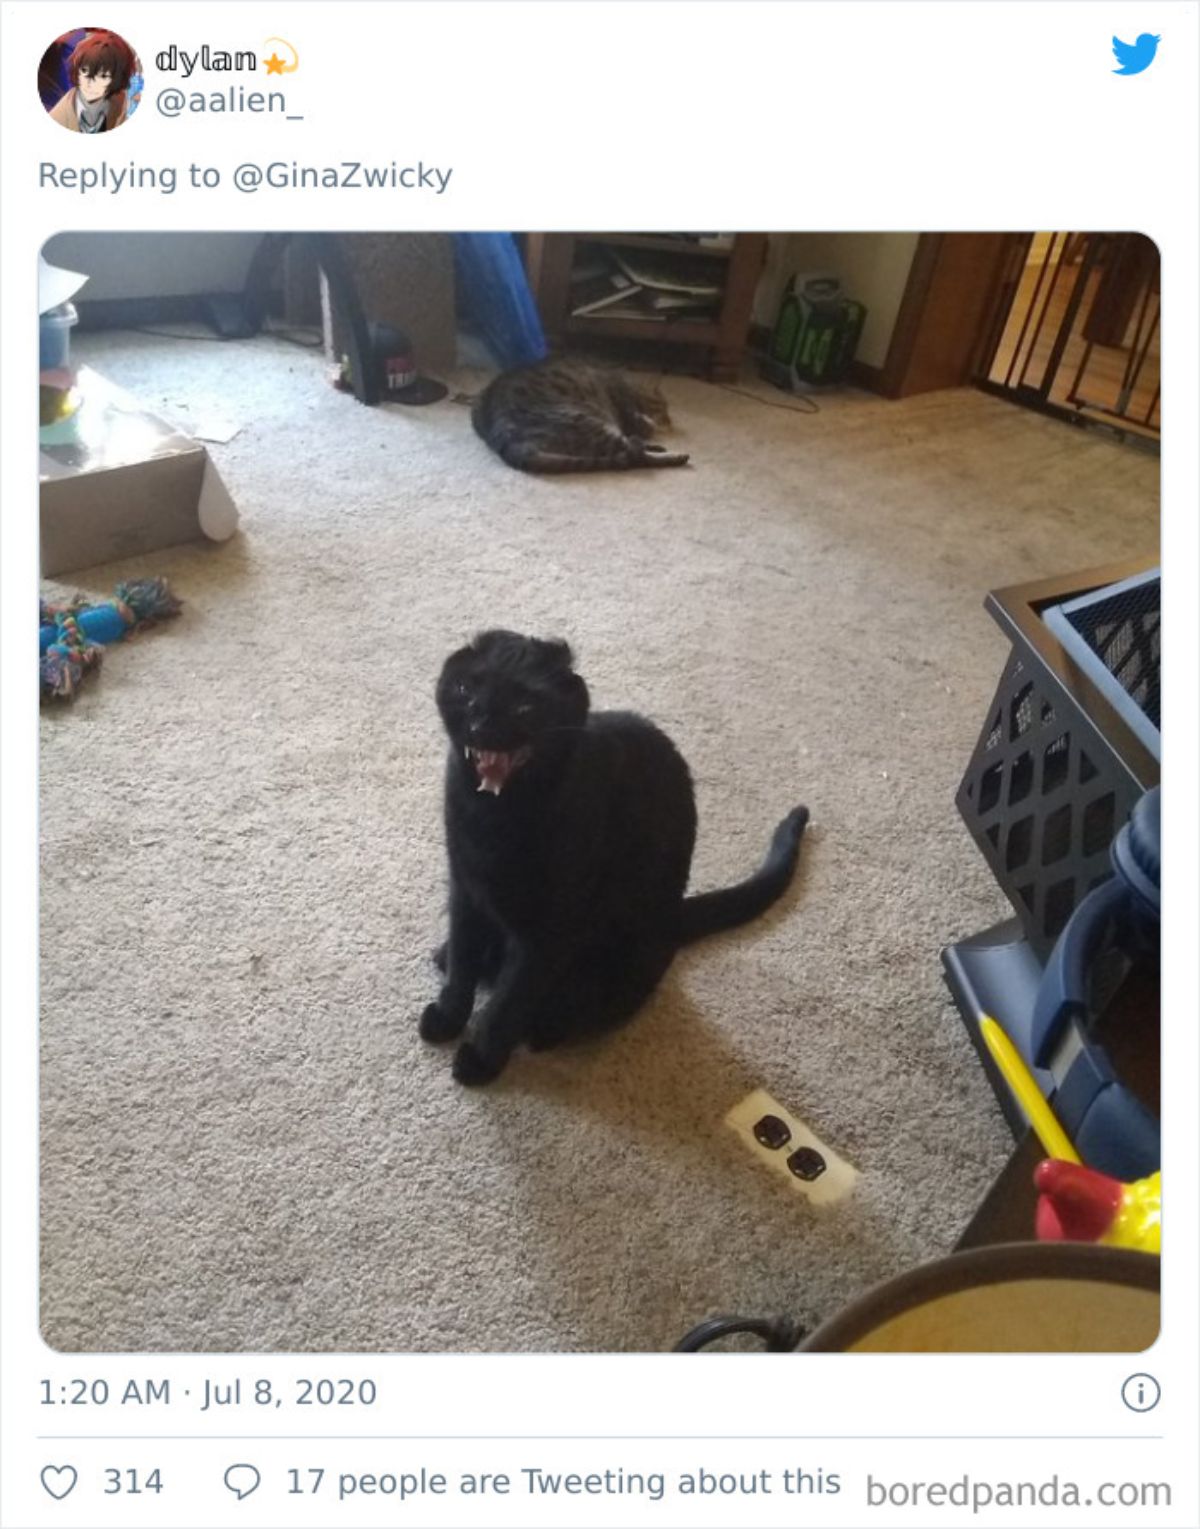 tweet of a black dog yawning with teeth showing sitting on a brown carpet with a grey tabby sleeping behind it